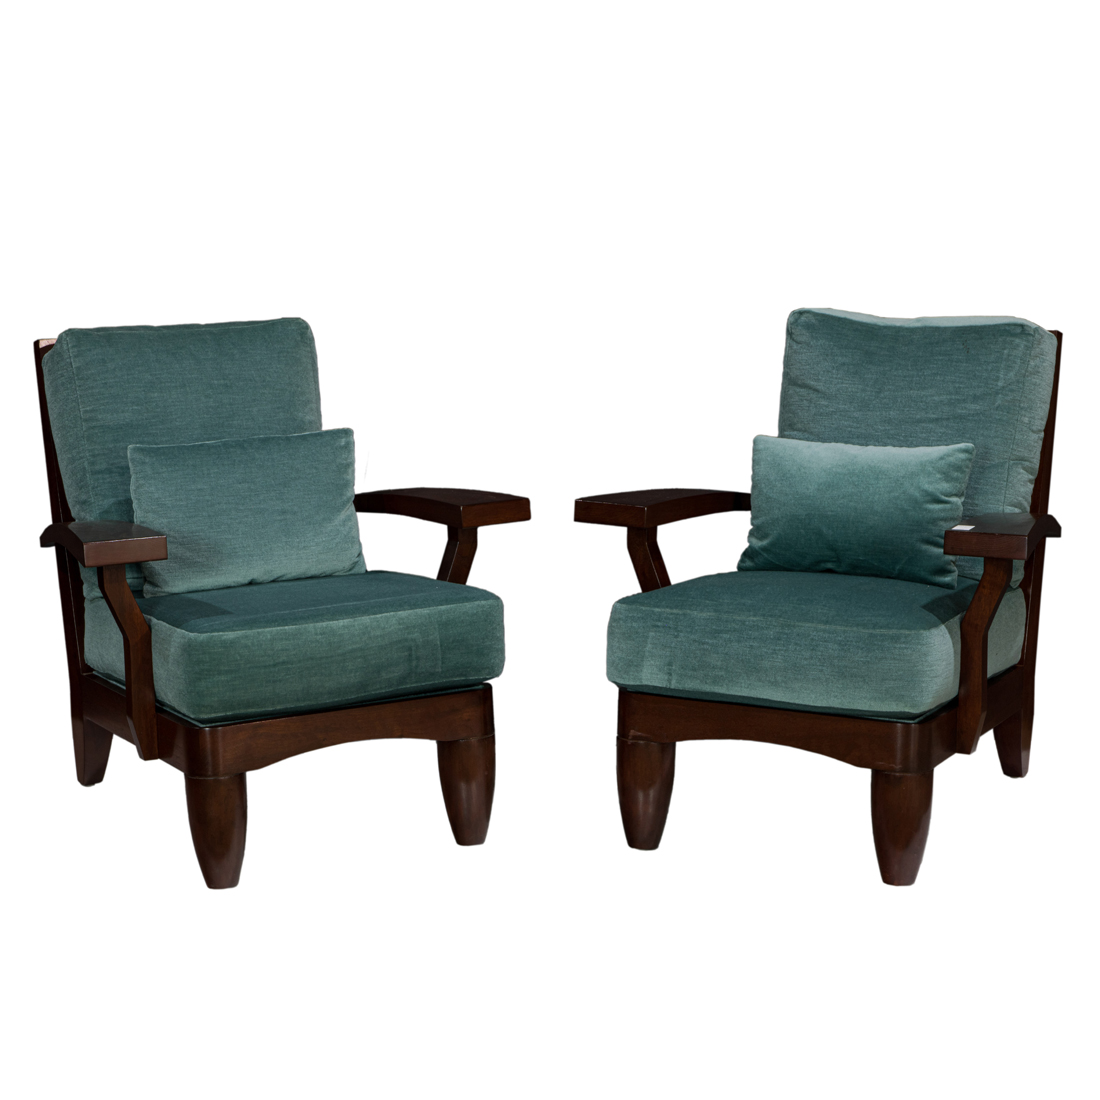 A PAIR OF CONTEMPORARY LOUNGE CHAIRS 3ce1d9